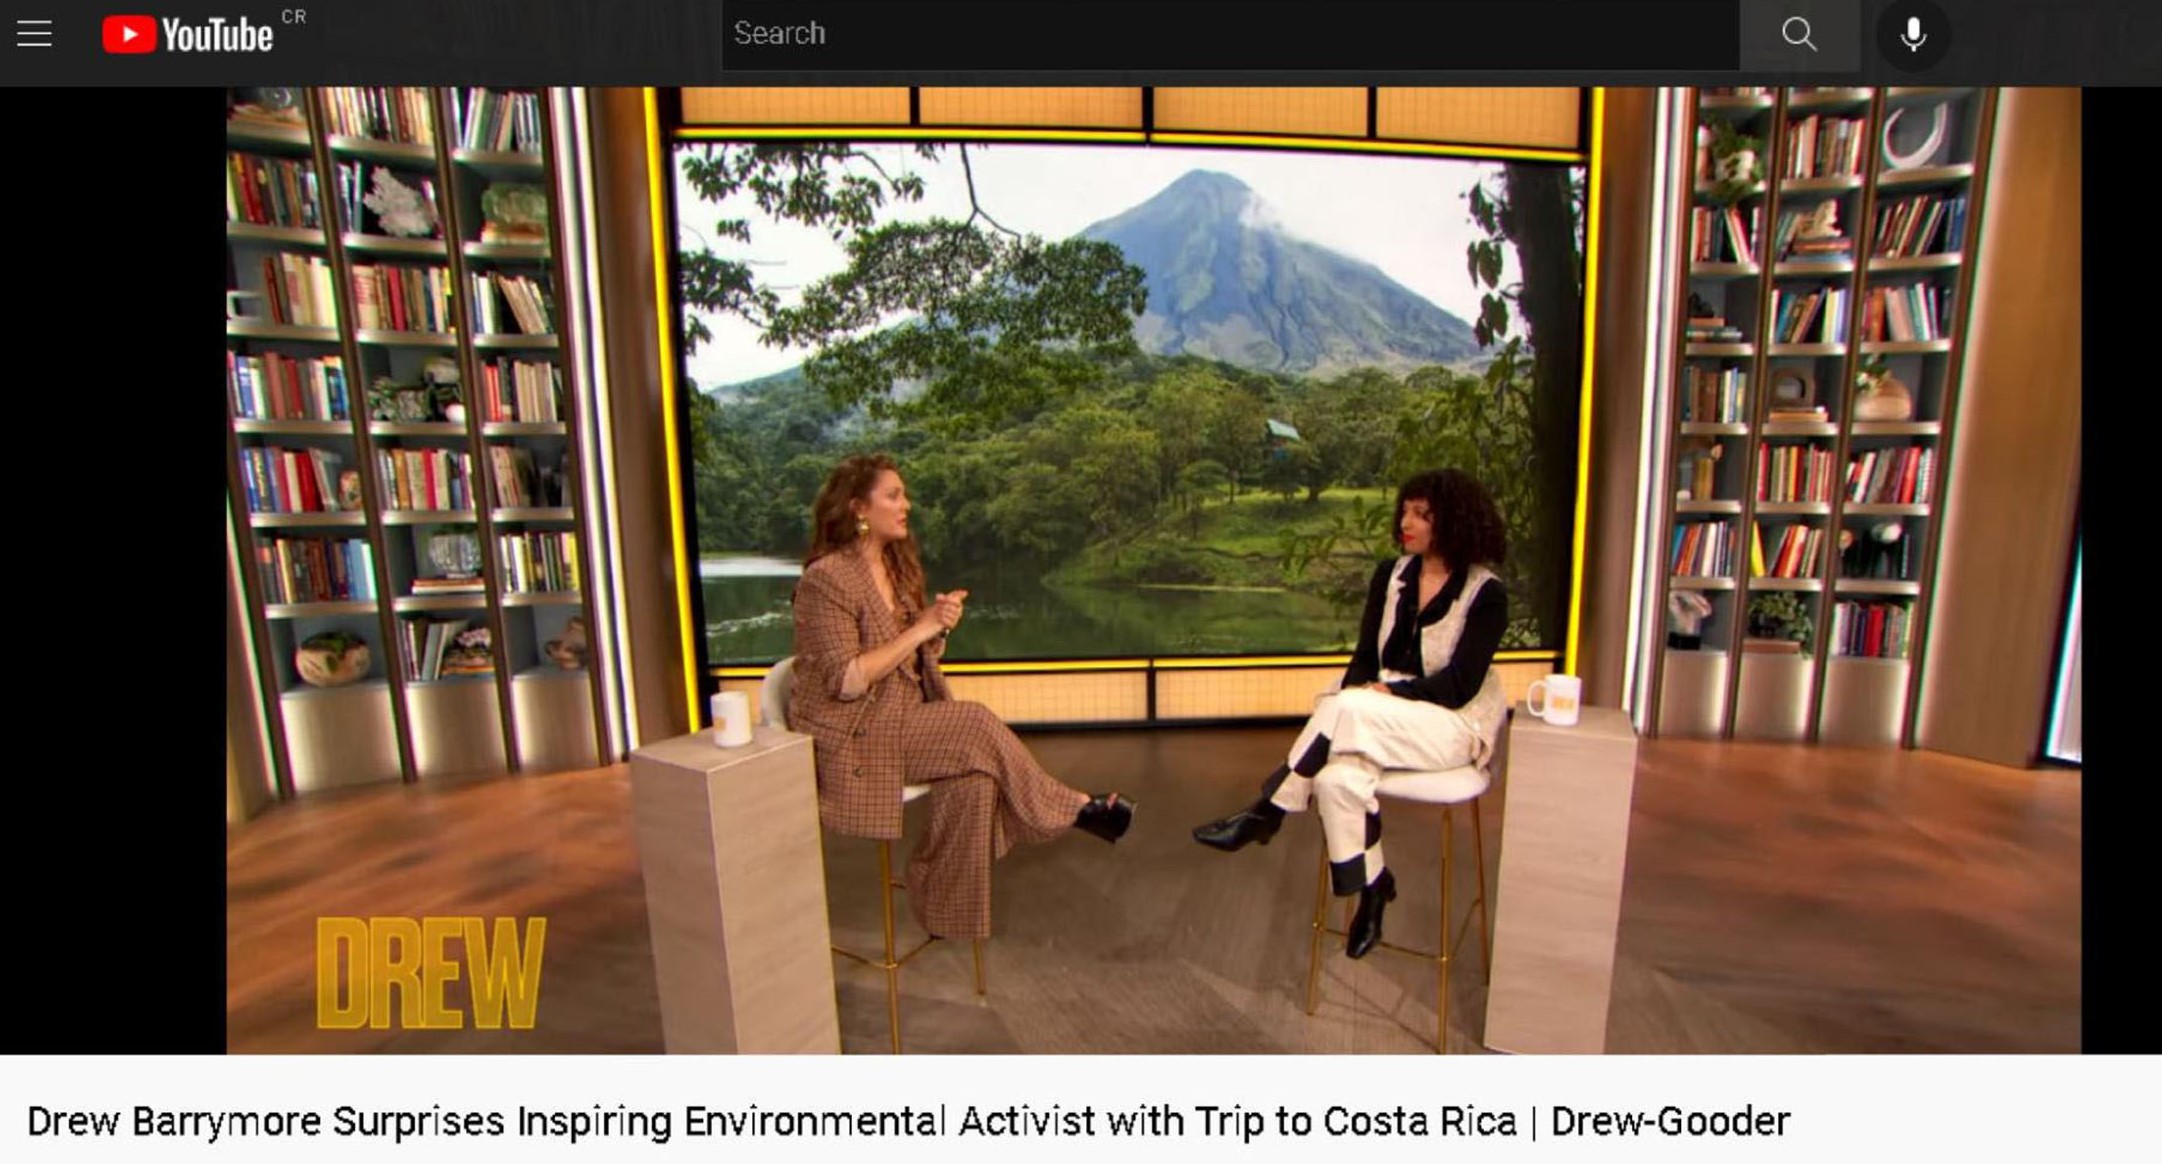 The Drew Barrymore Show with some high praise for Costa Rica